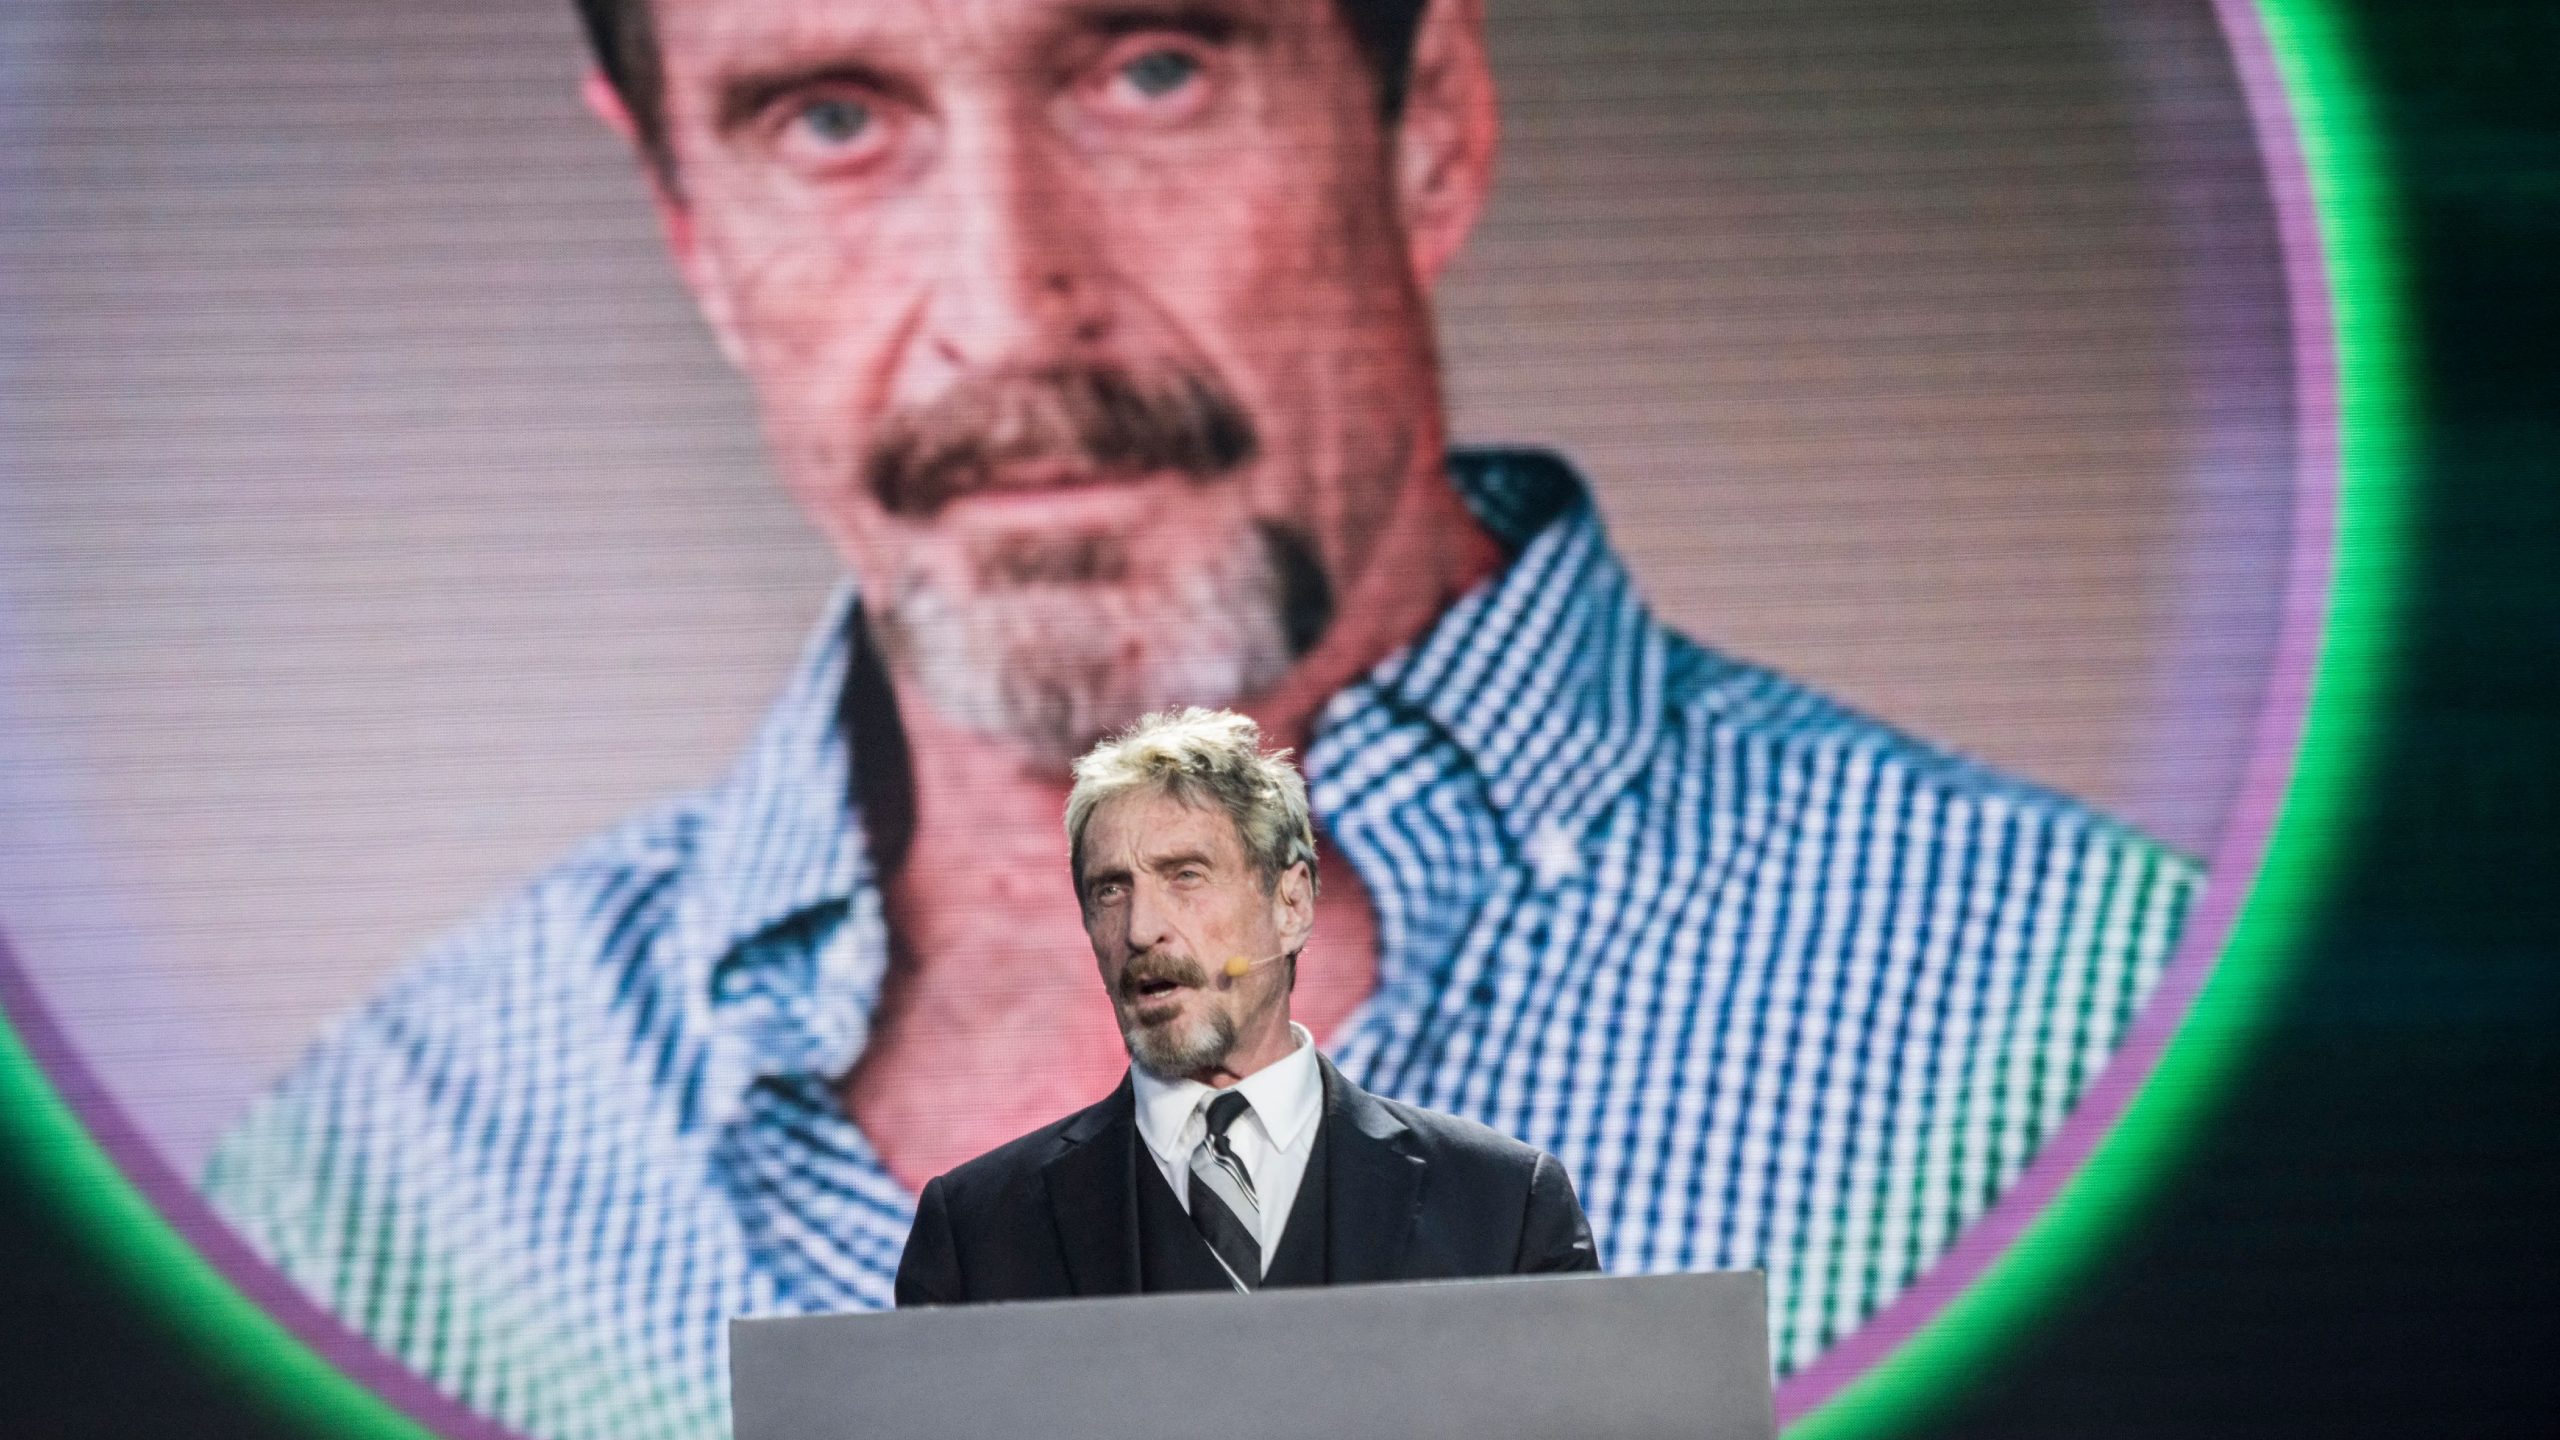 John McAfee, creator of antivirus, dies by suicide in Barcelona prison at 75: Reports